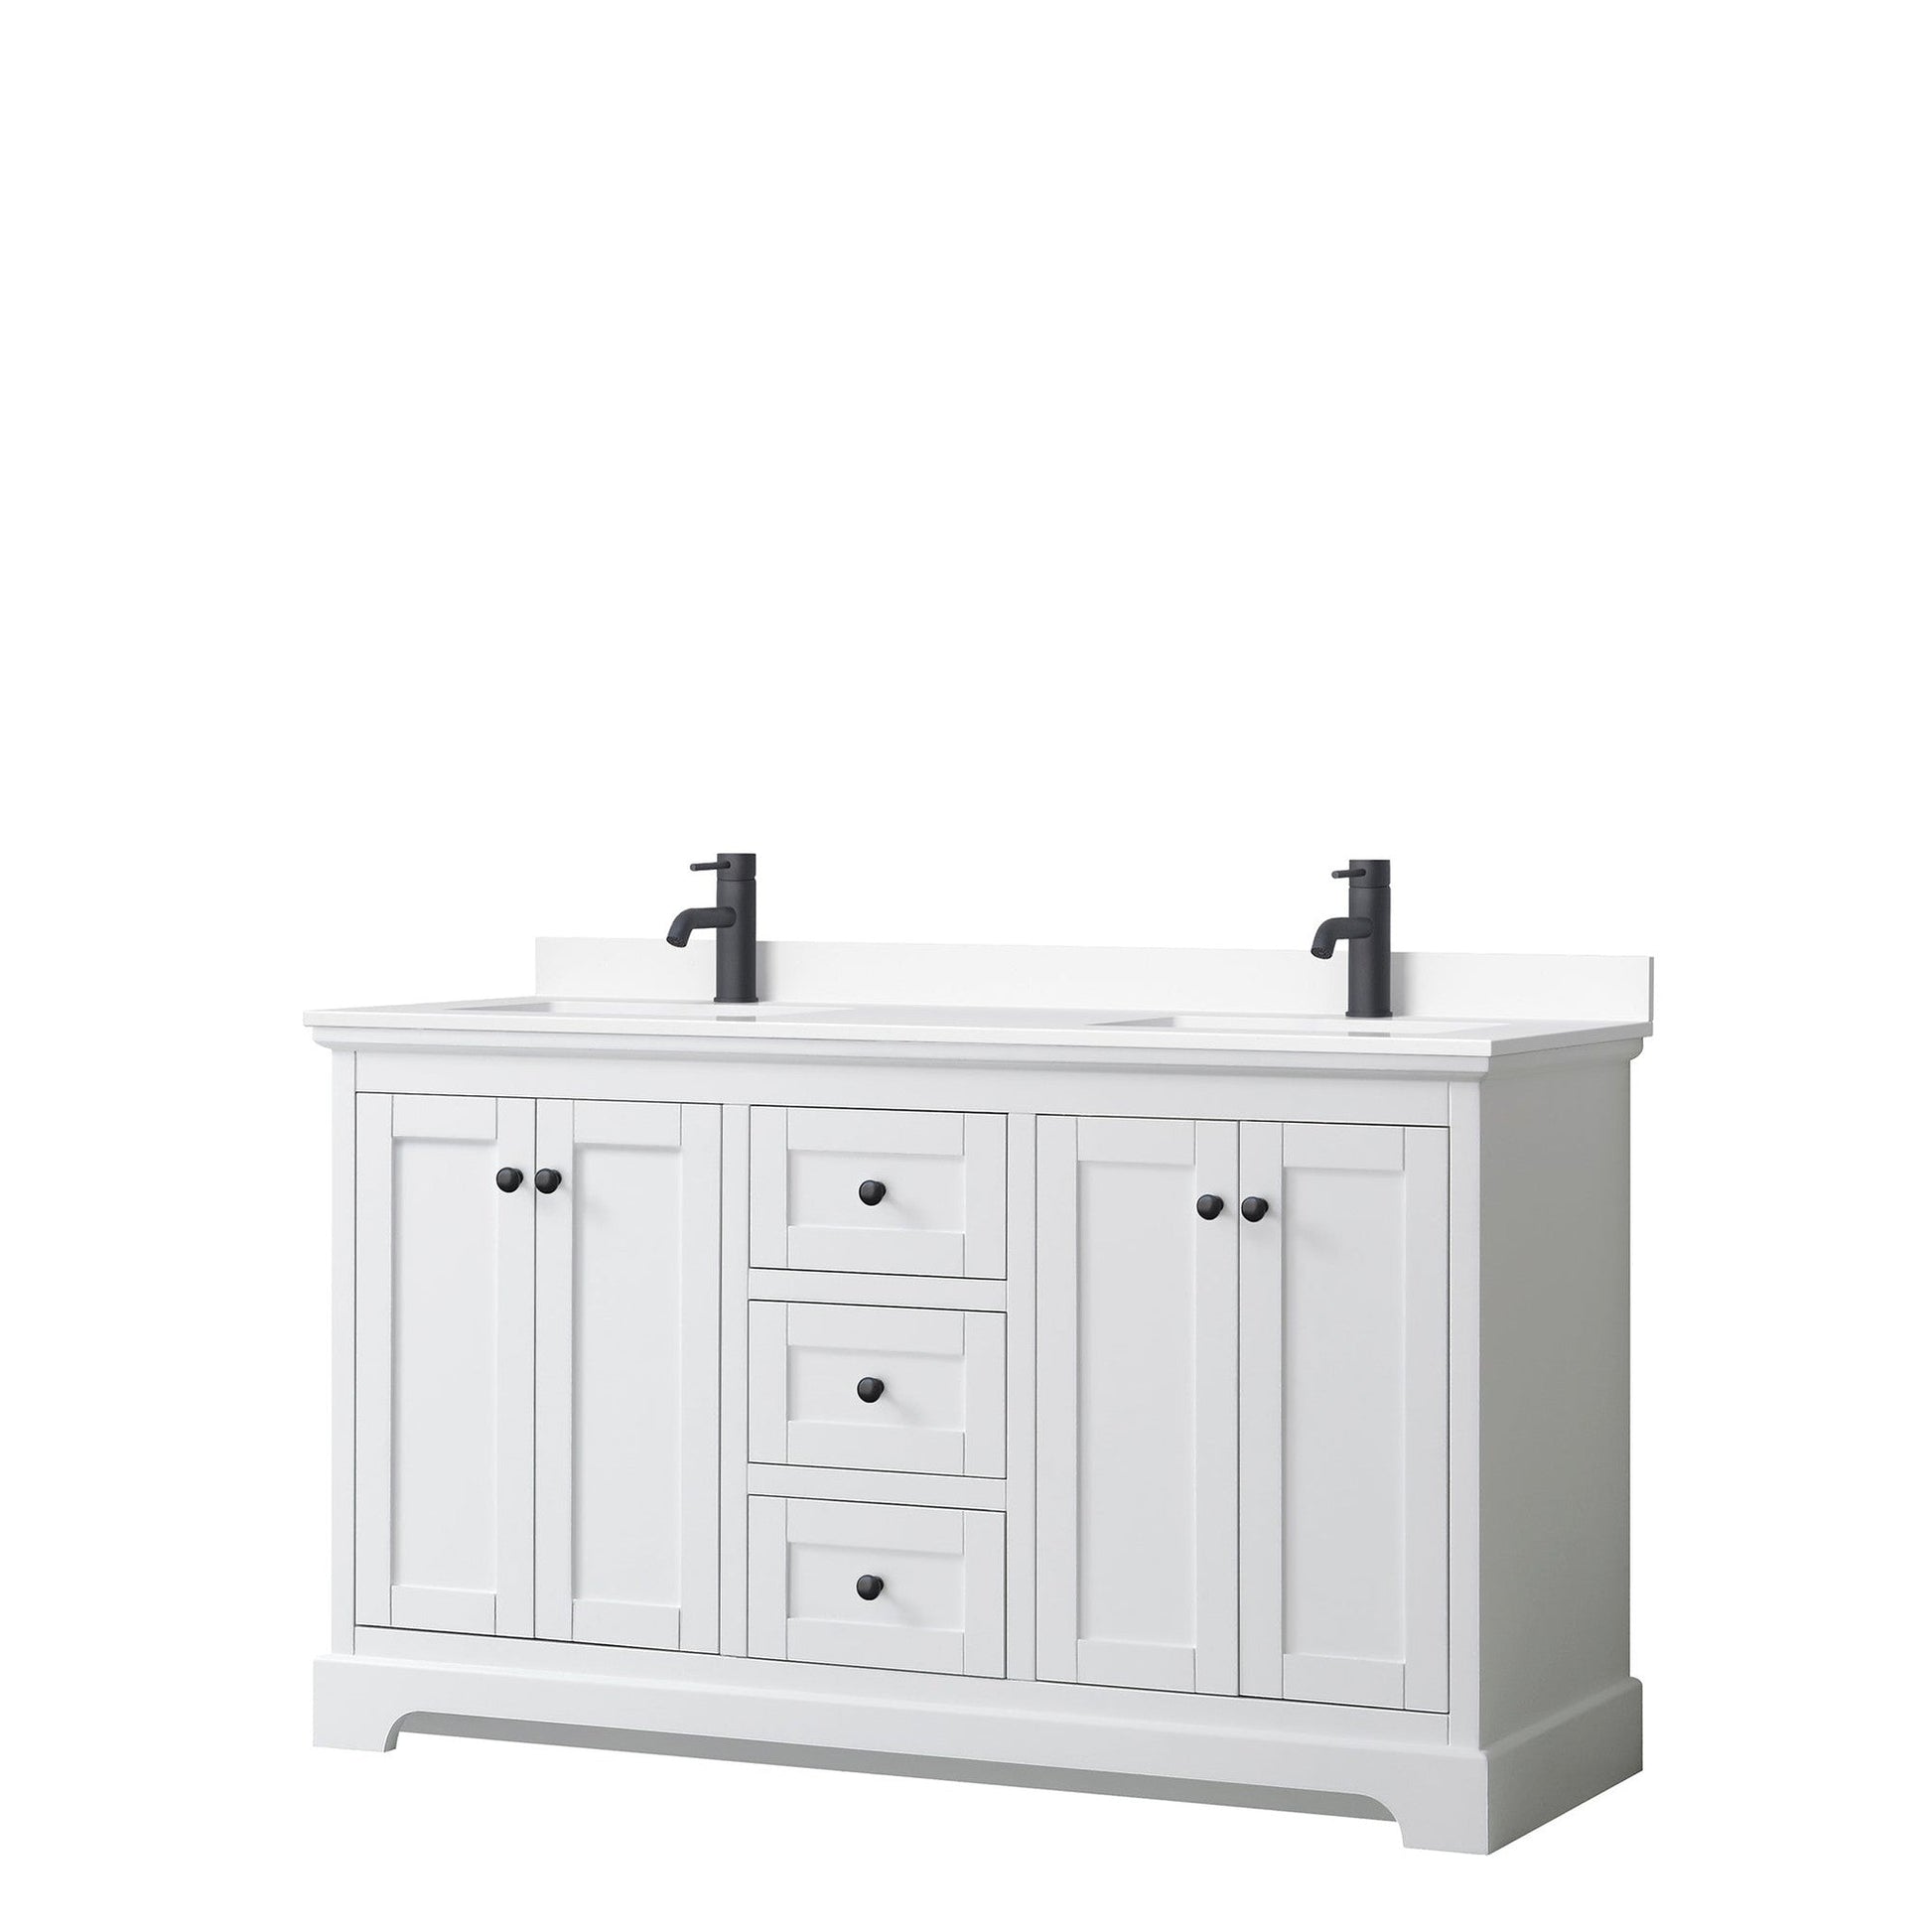 Avery 60" Double Bathroom Vanity in White, White Cultured Marble Countertop, Undermount Square Sinks, Matte Black Trim